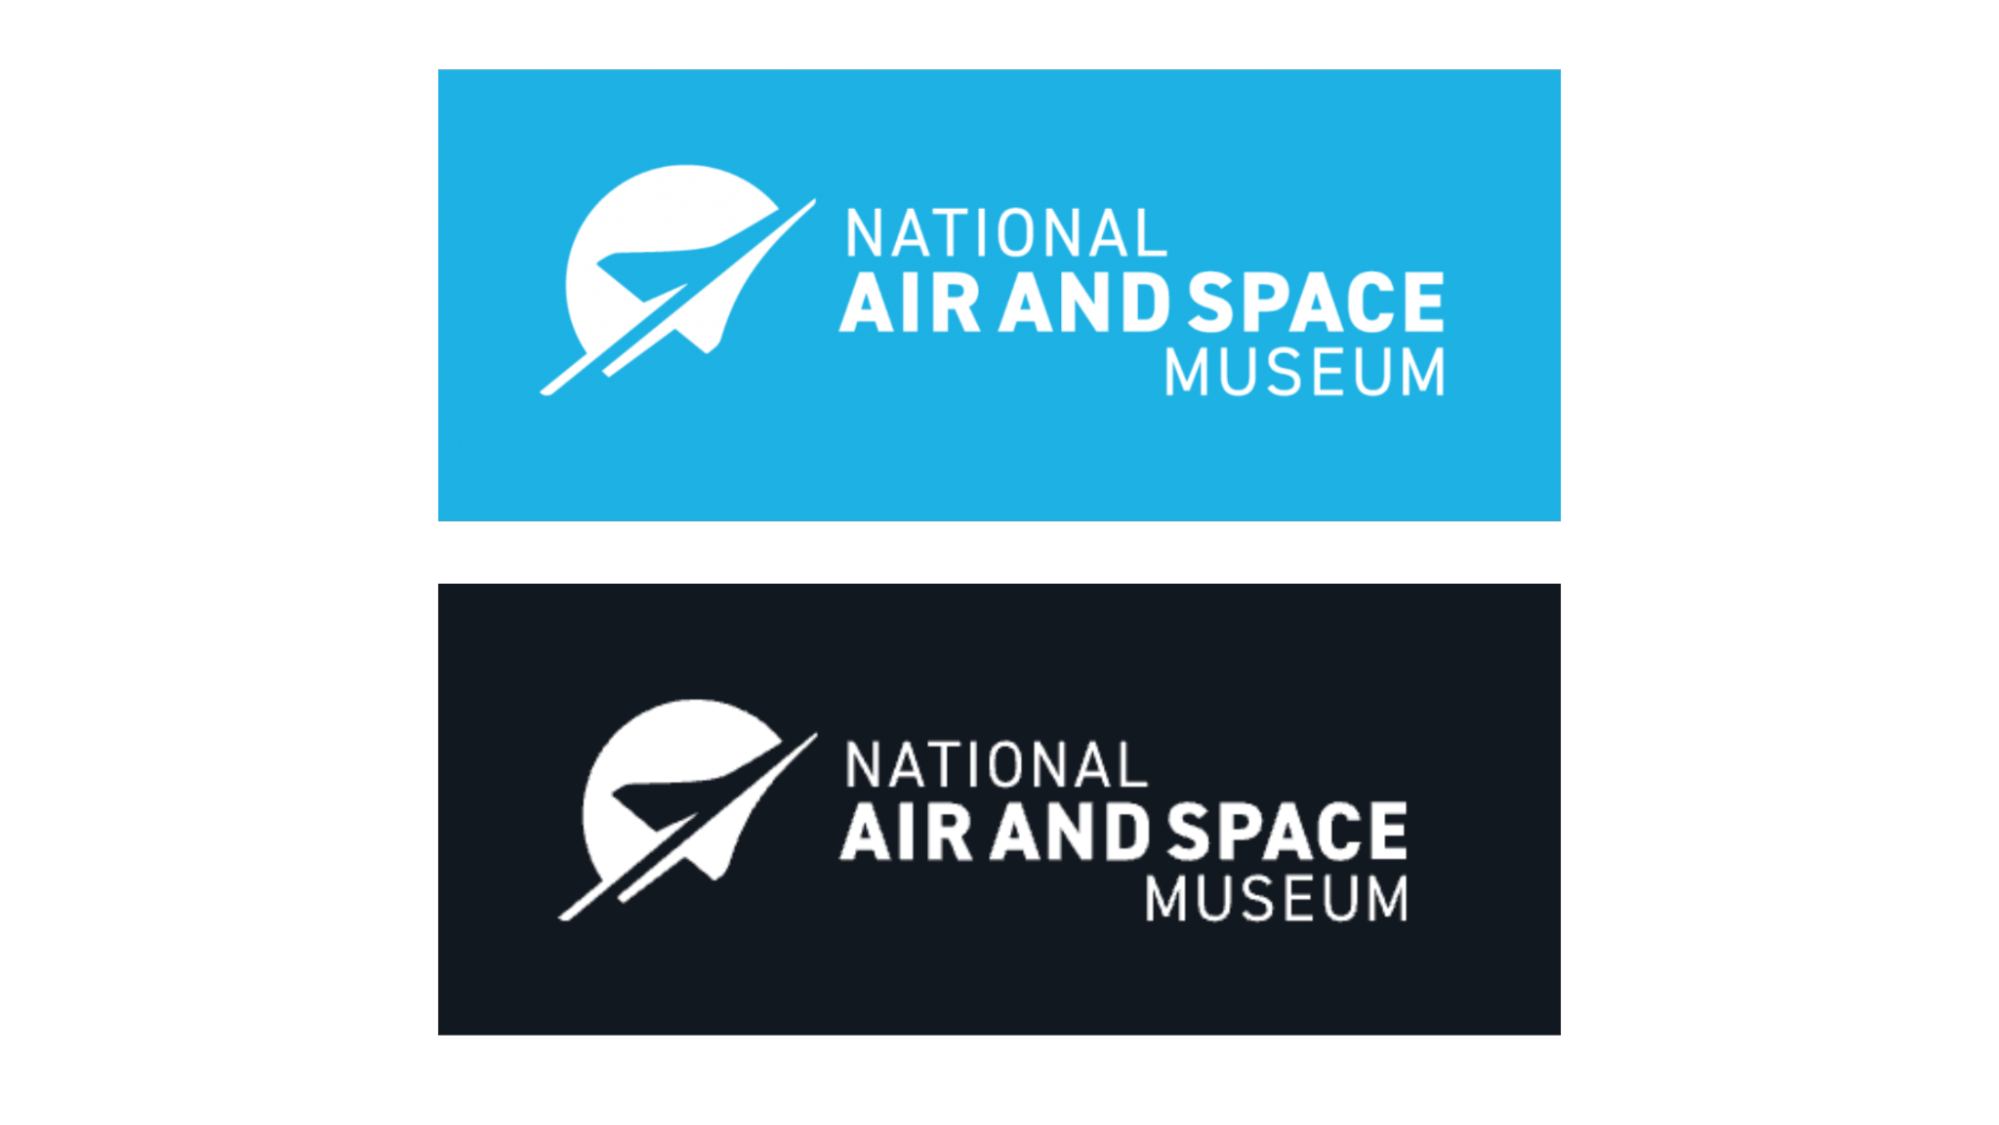 National Air and Space Museum logos